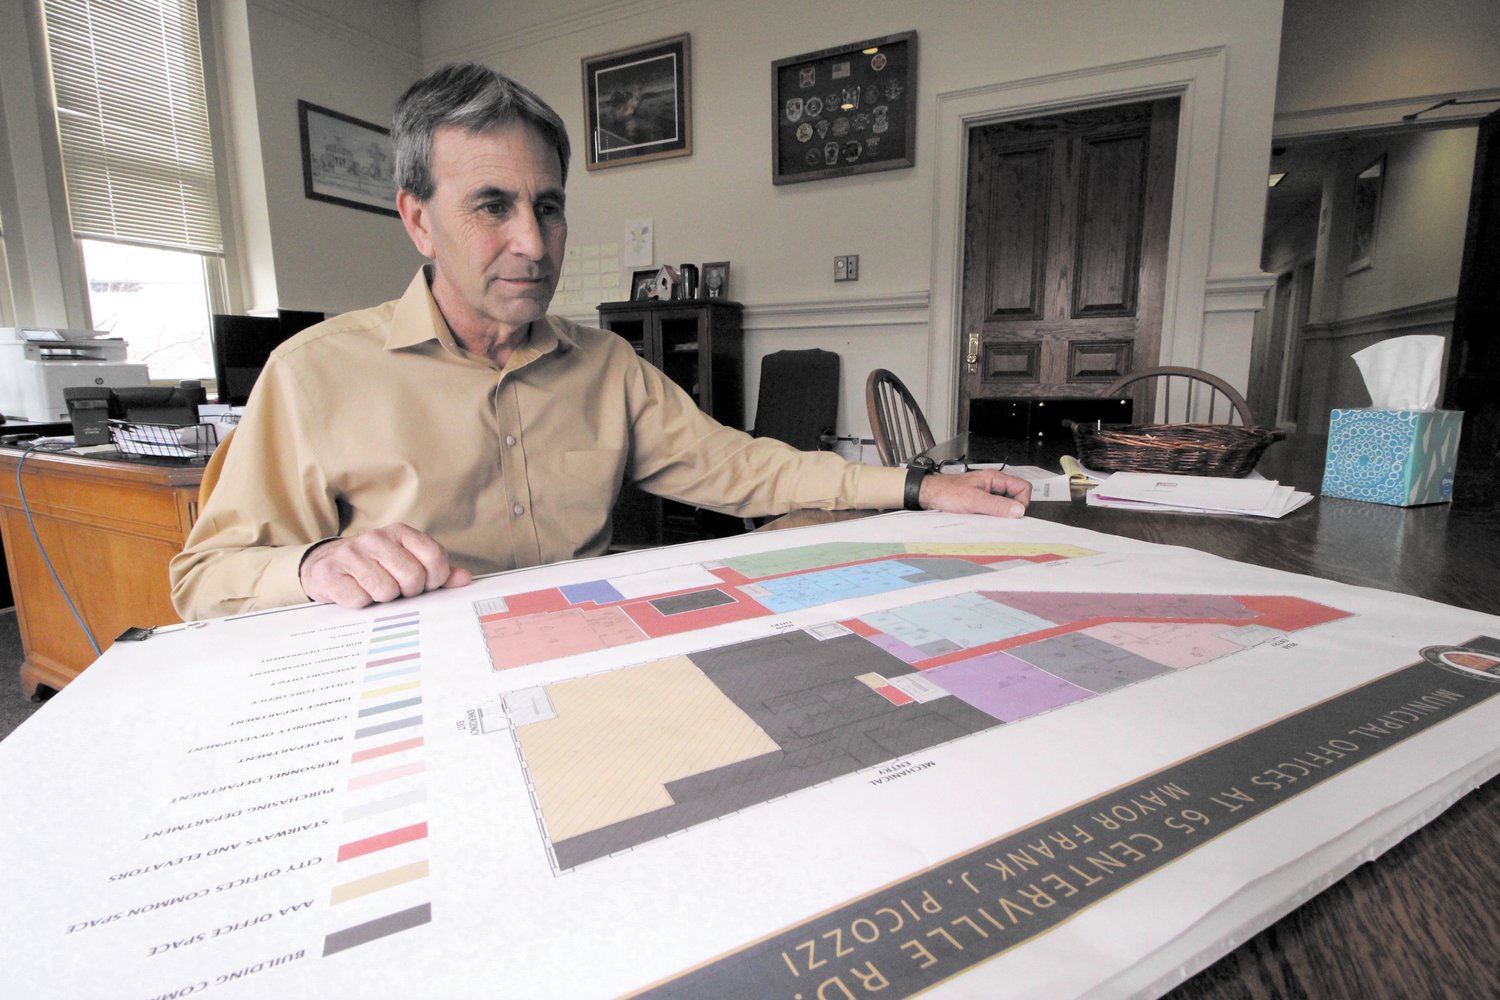 PALNNING AHEAD: Mayor Frank Picozzi looks over the office plans for the City Hall Annex to be located in the former Apponaug Mill saw tooth building owned by AAA Northeast. The offices are projected to be ready this summer. (Warwick Beacon photo)